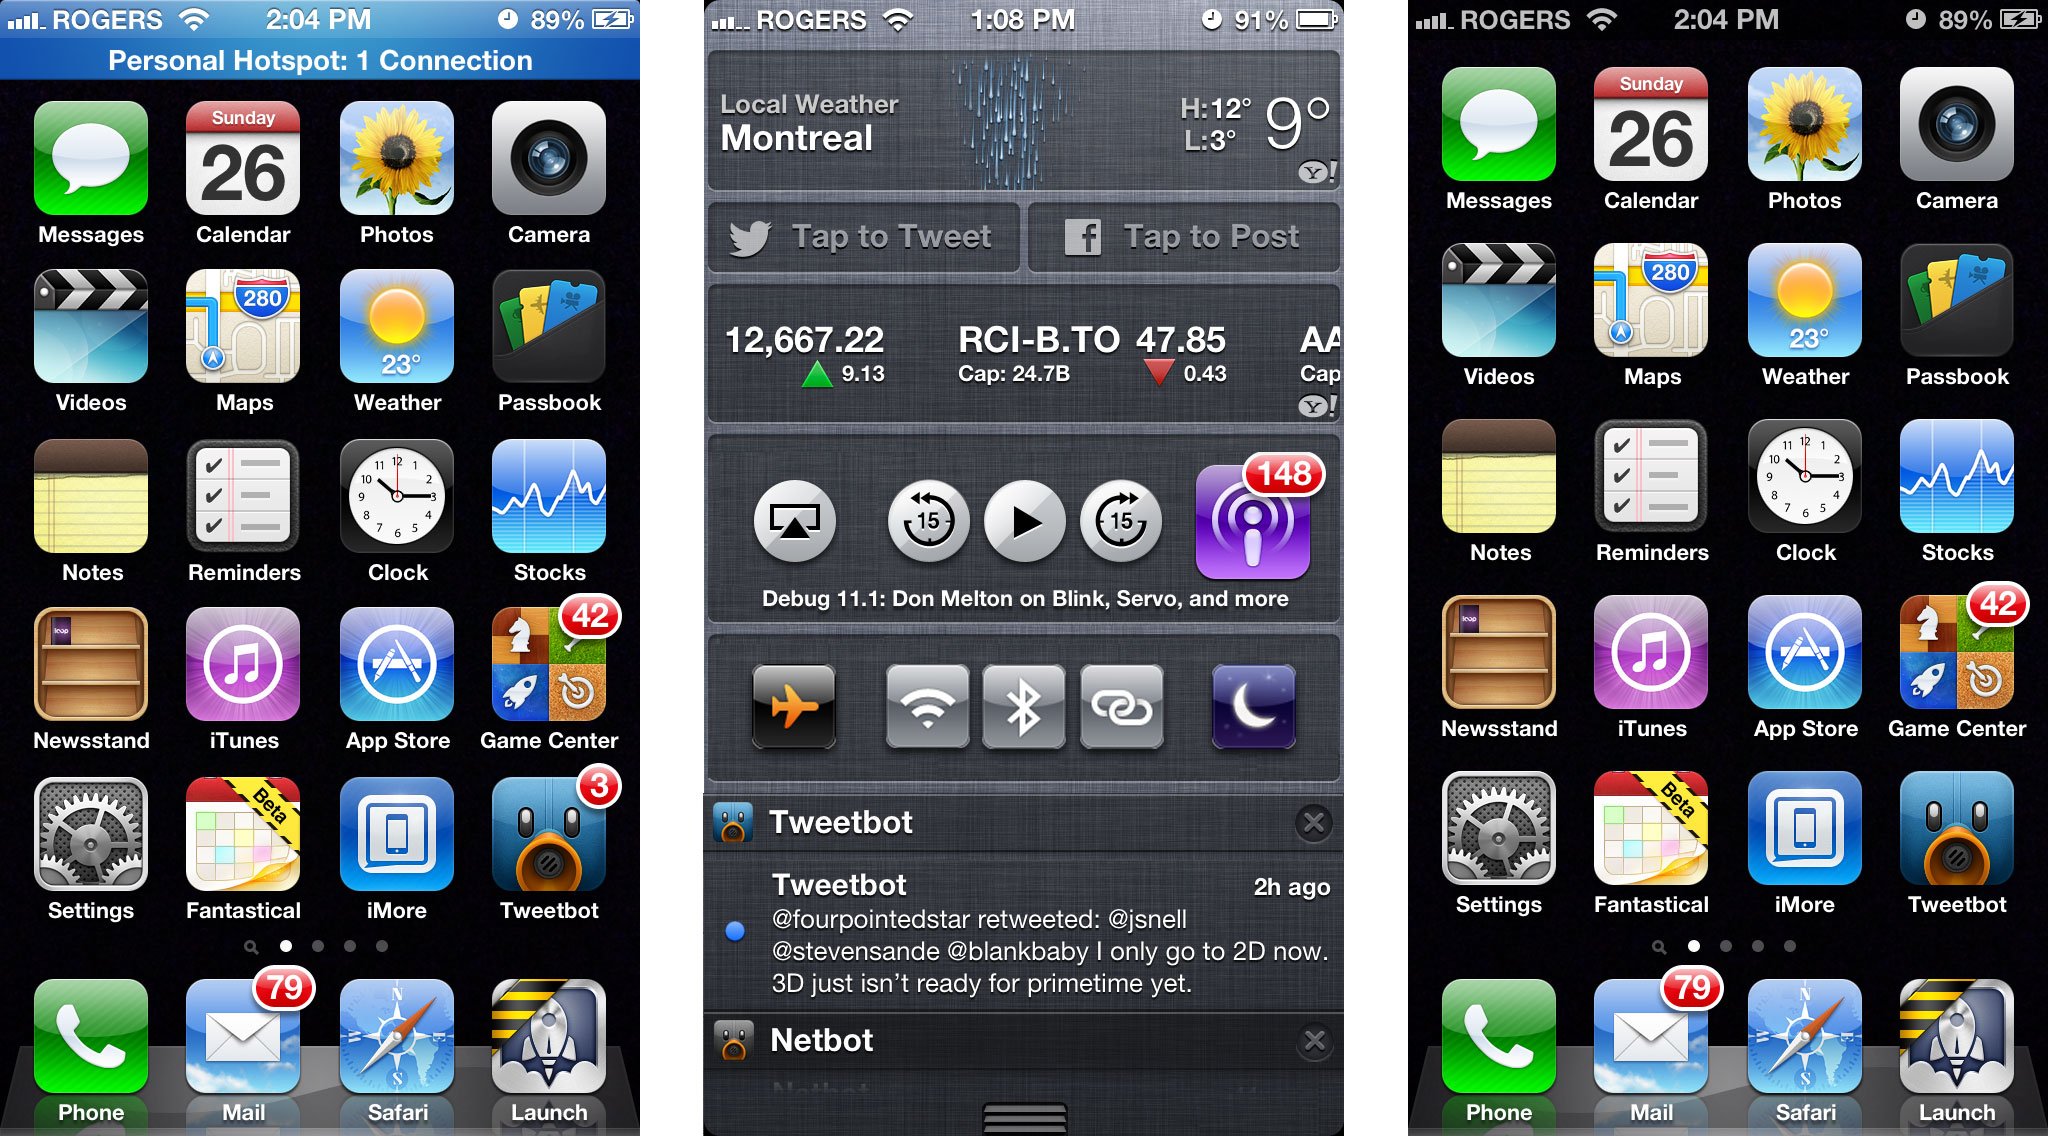 Quickest and most dirtiest mockup of controls put into Notification Center